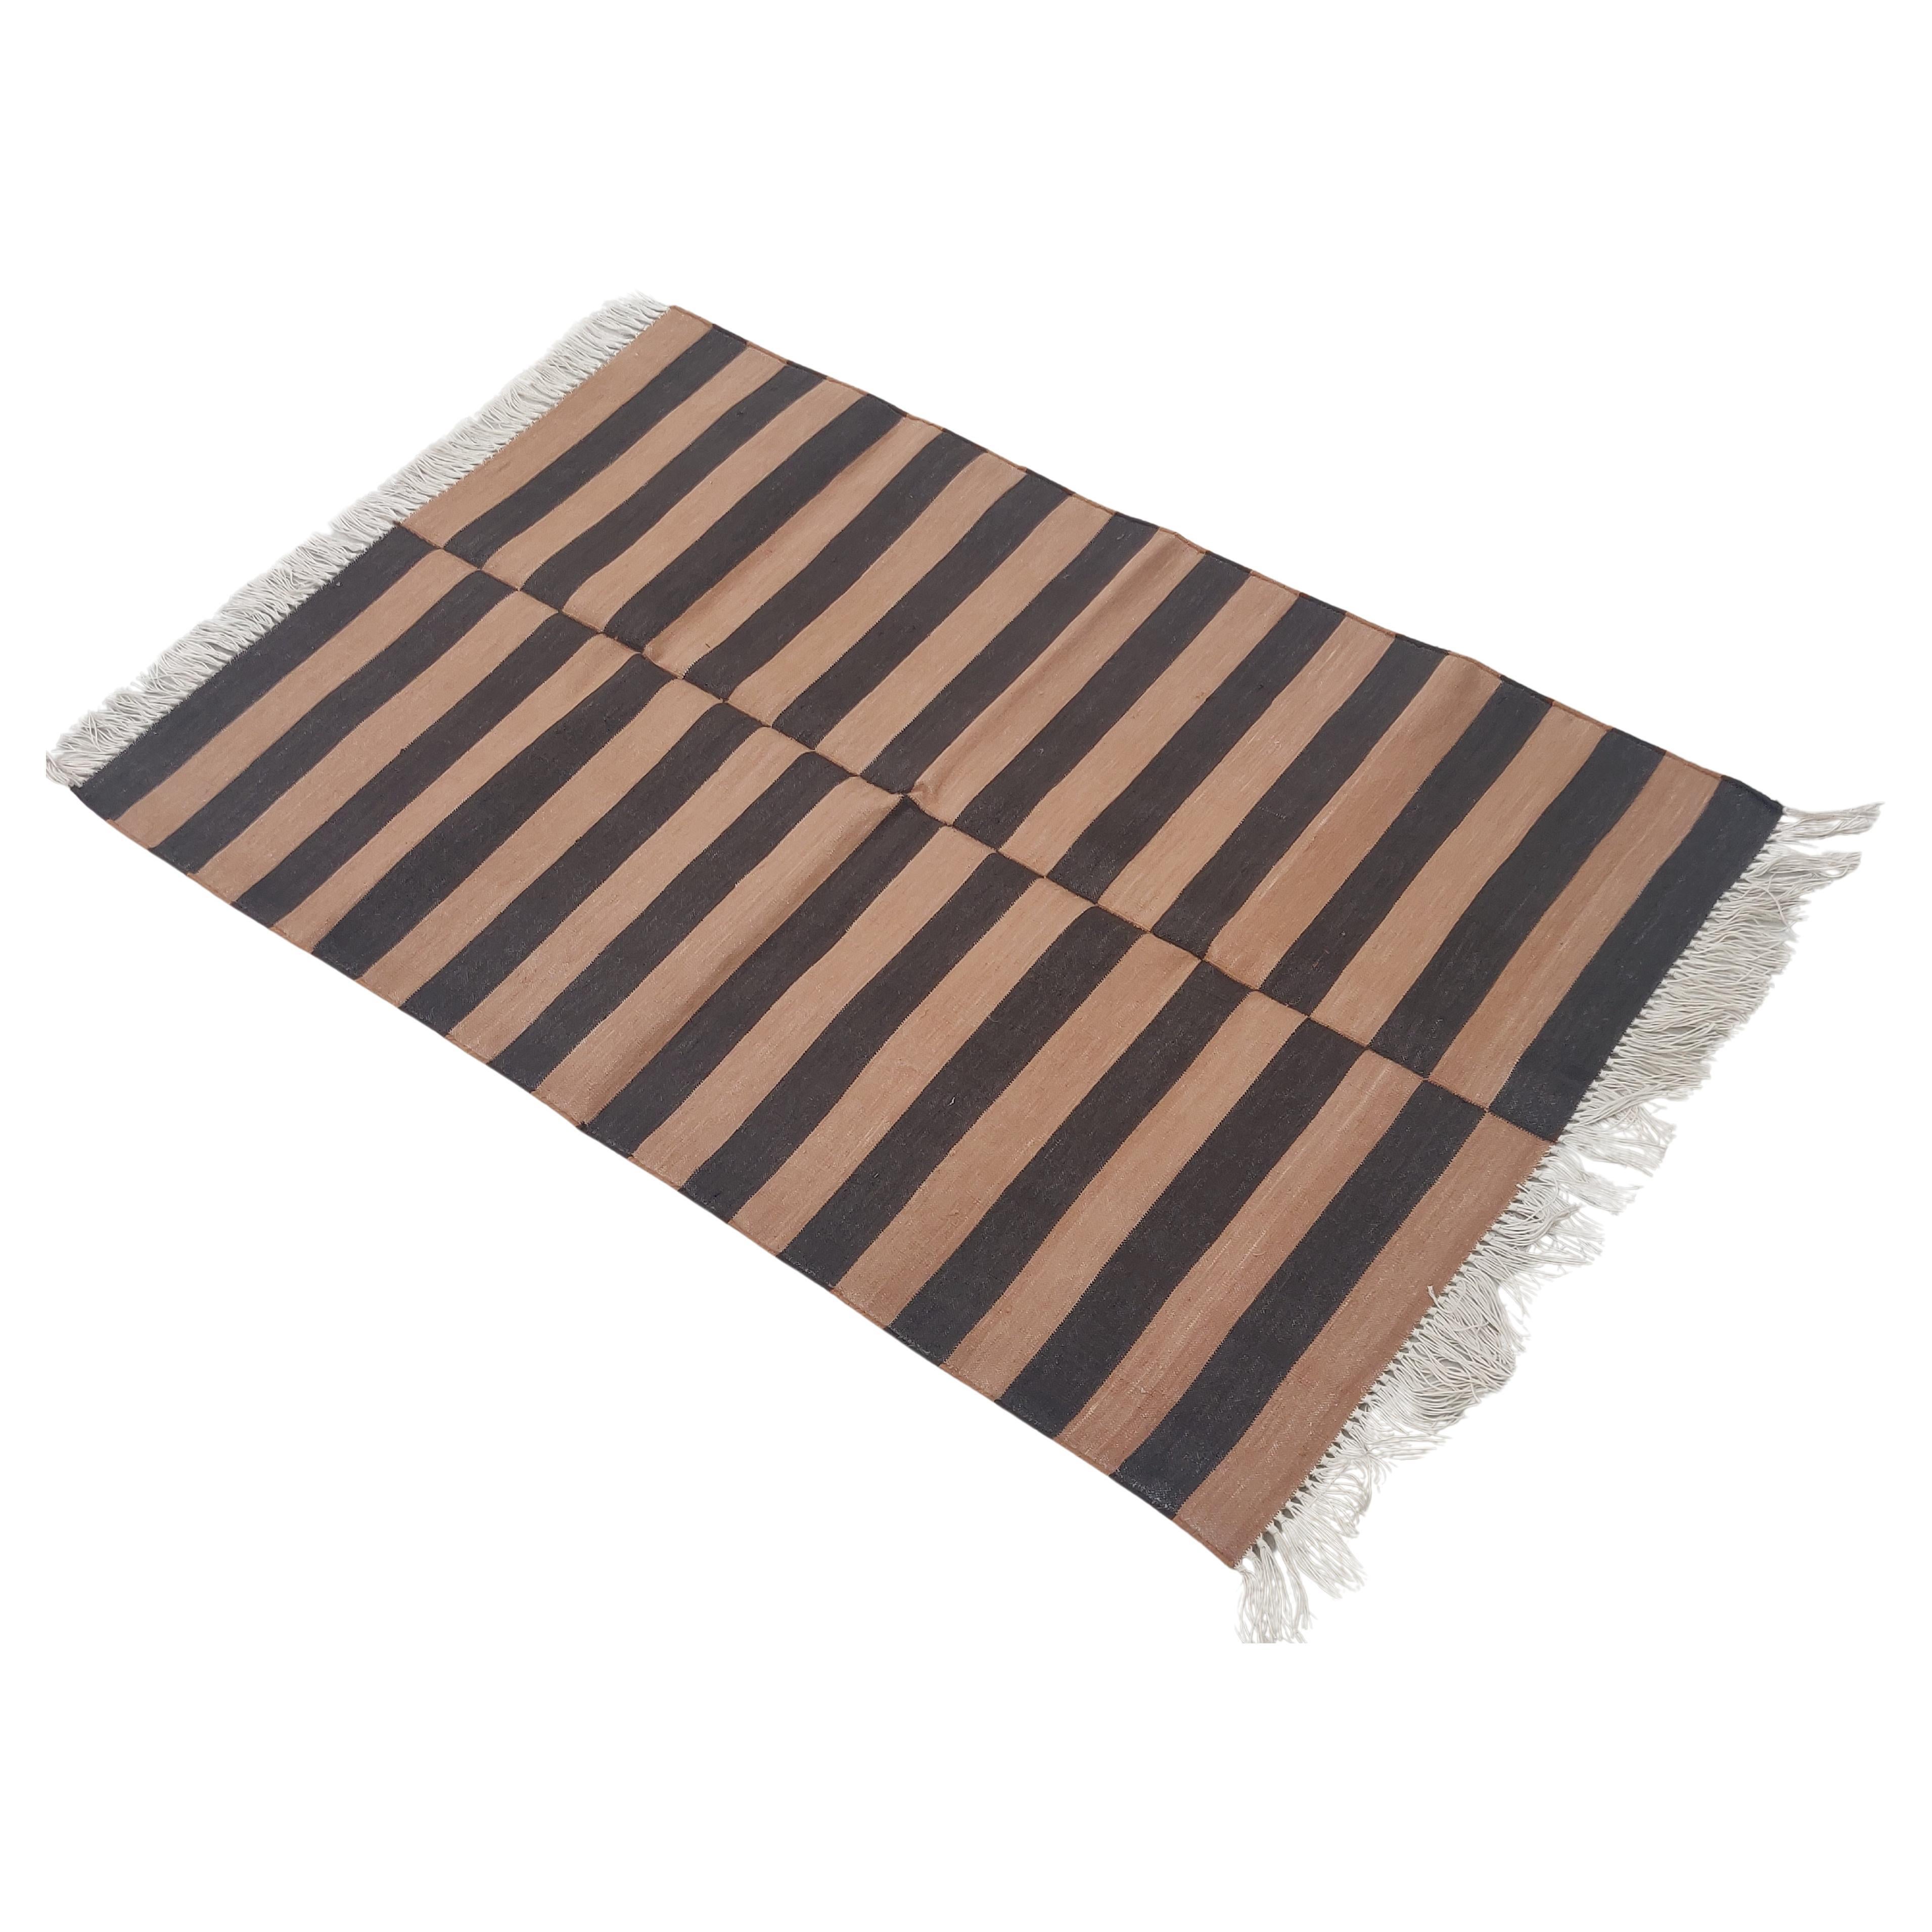 Handmade Cotton Area Flat Weave Rug, 2.5x4 Tan And Brown Striped Indian Dhurrie For Sale